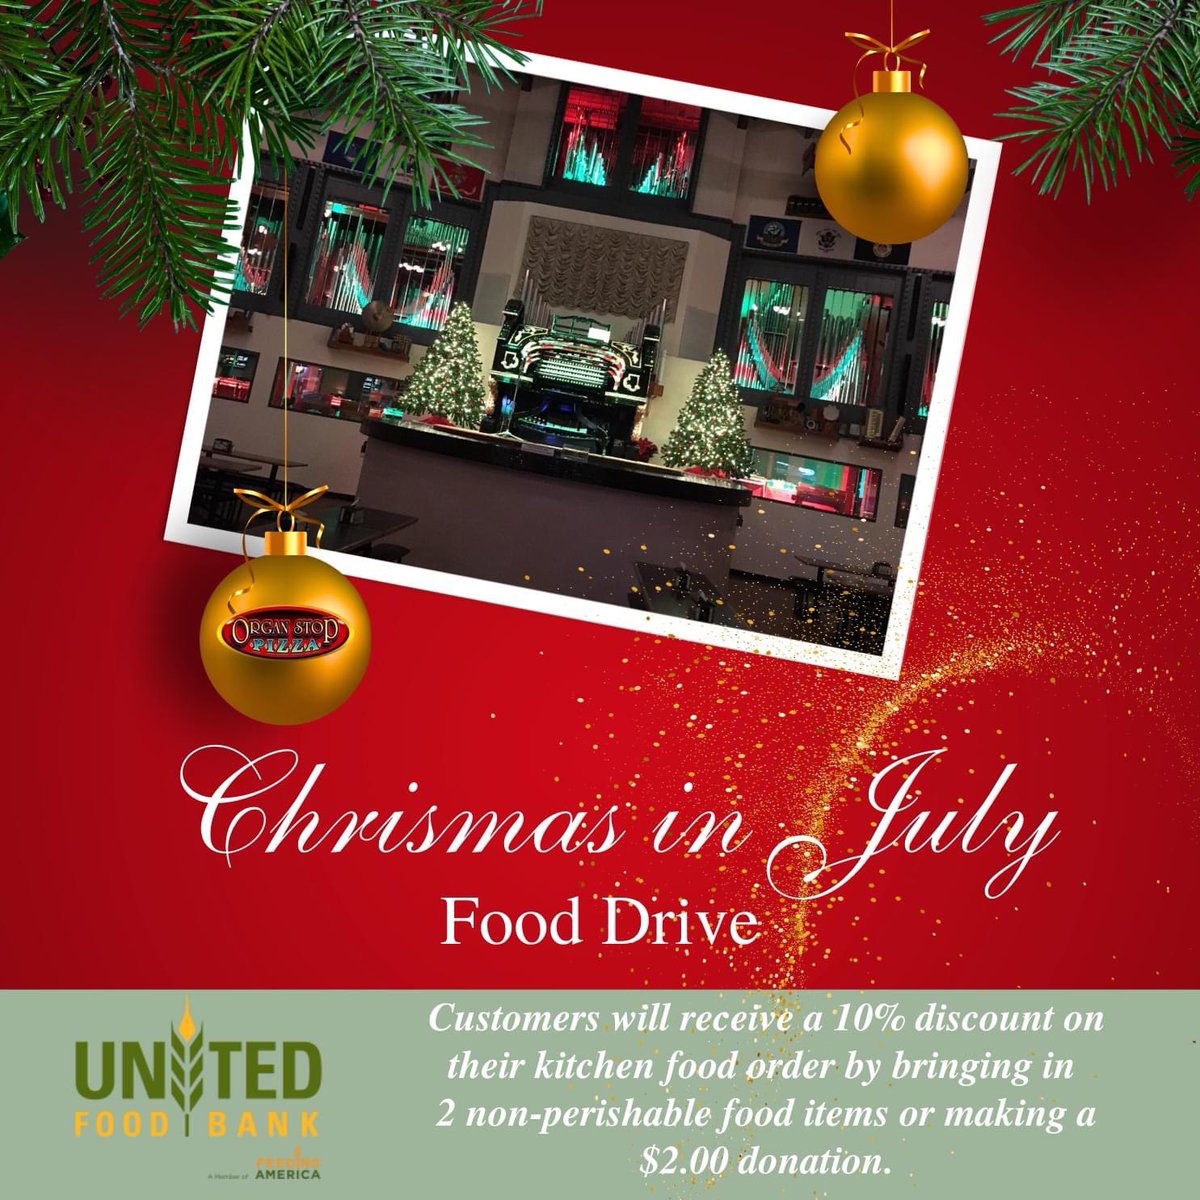 Another reminder of a great way to cool off and do something good in the valley…check out Christmas in July at @OrganStopPizza in Mesa! This food drive and fun celebration benefits United Food Bank. PLUS, Santa will be there on Sat/Sun!
organstoppizza.com 
#DoSomethingGood